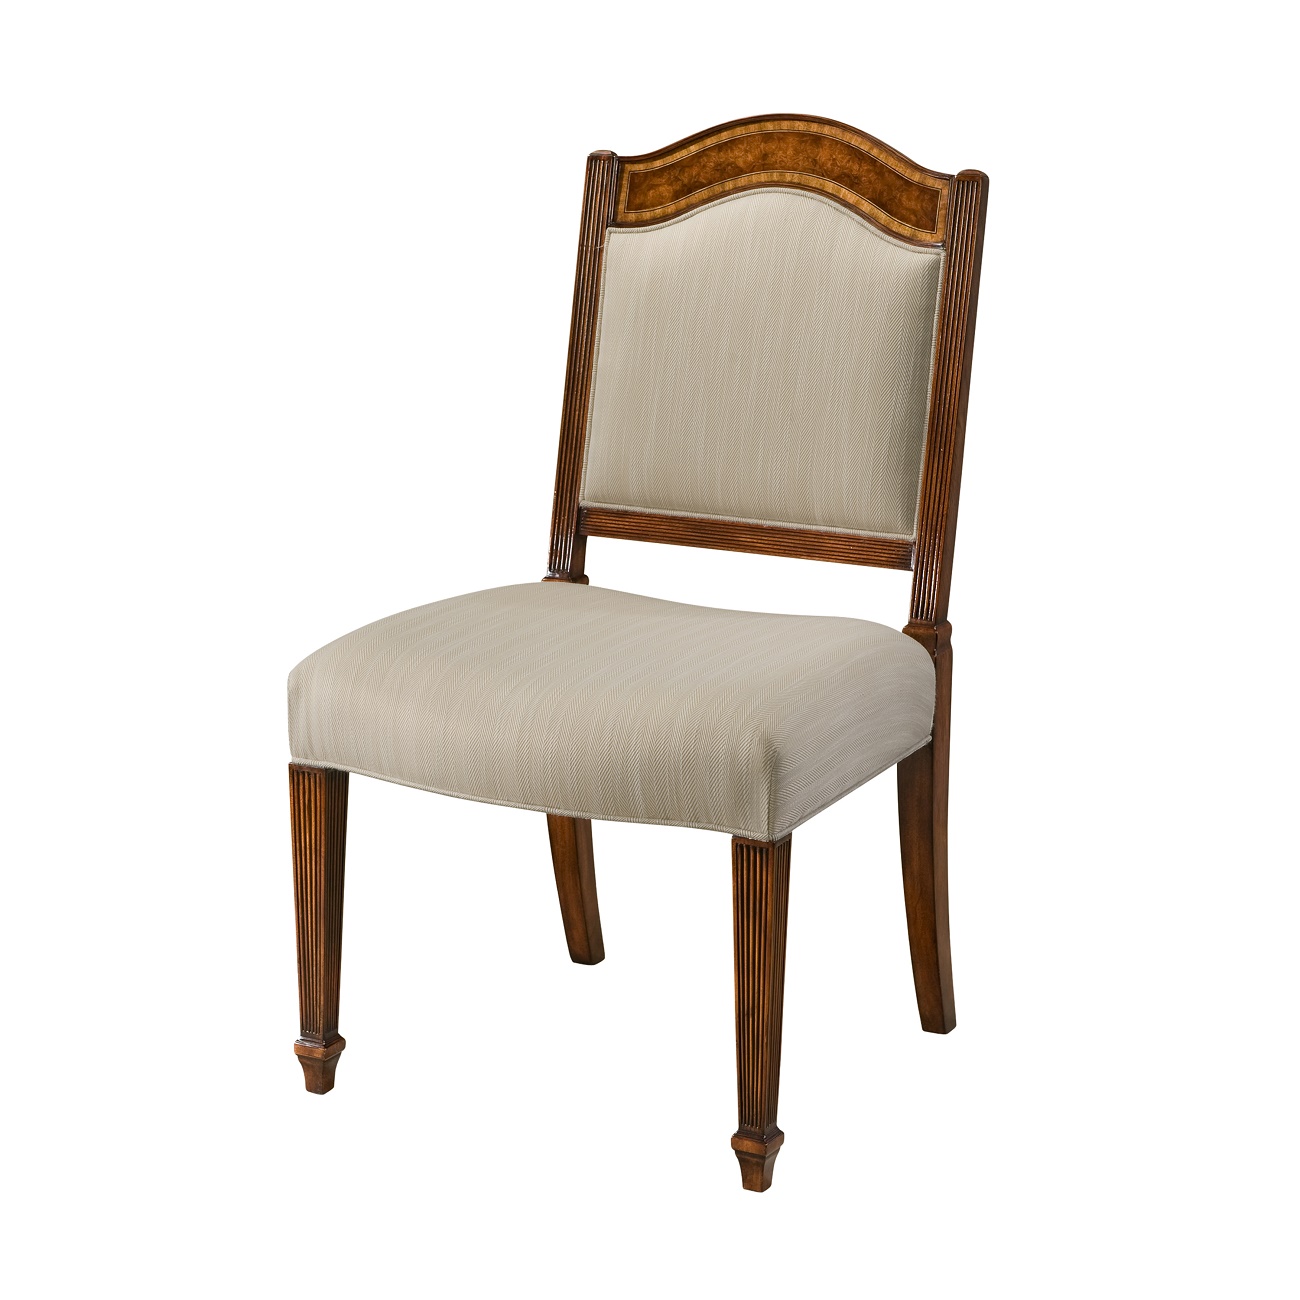 Sheraton's Satinwood Chair, Theodore Alexander Chair, Brooklyn, New York, Furniture by ABD